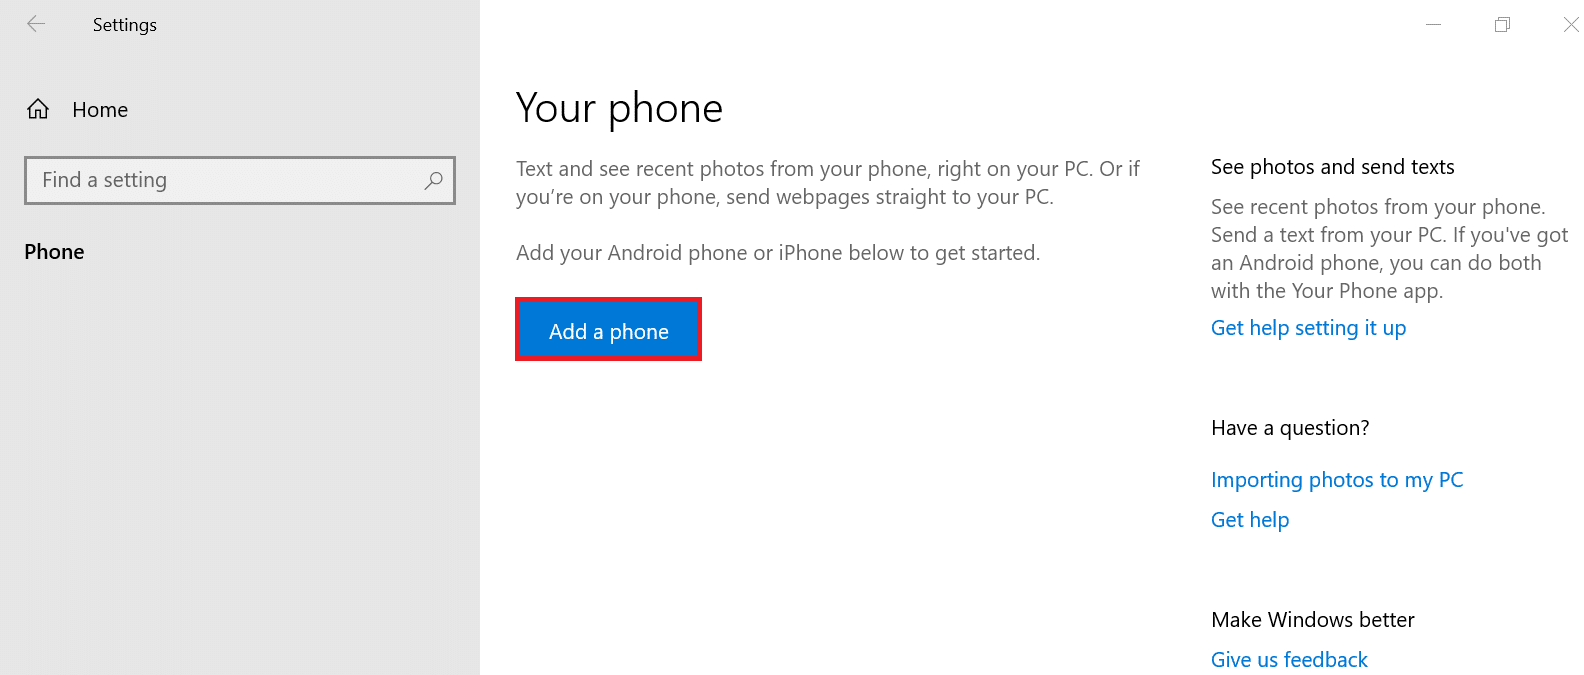 Then click on ADD A PHONE to link your phone to your pc. (2)